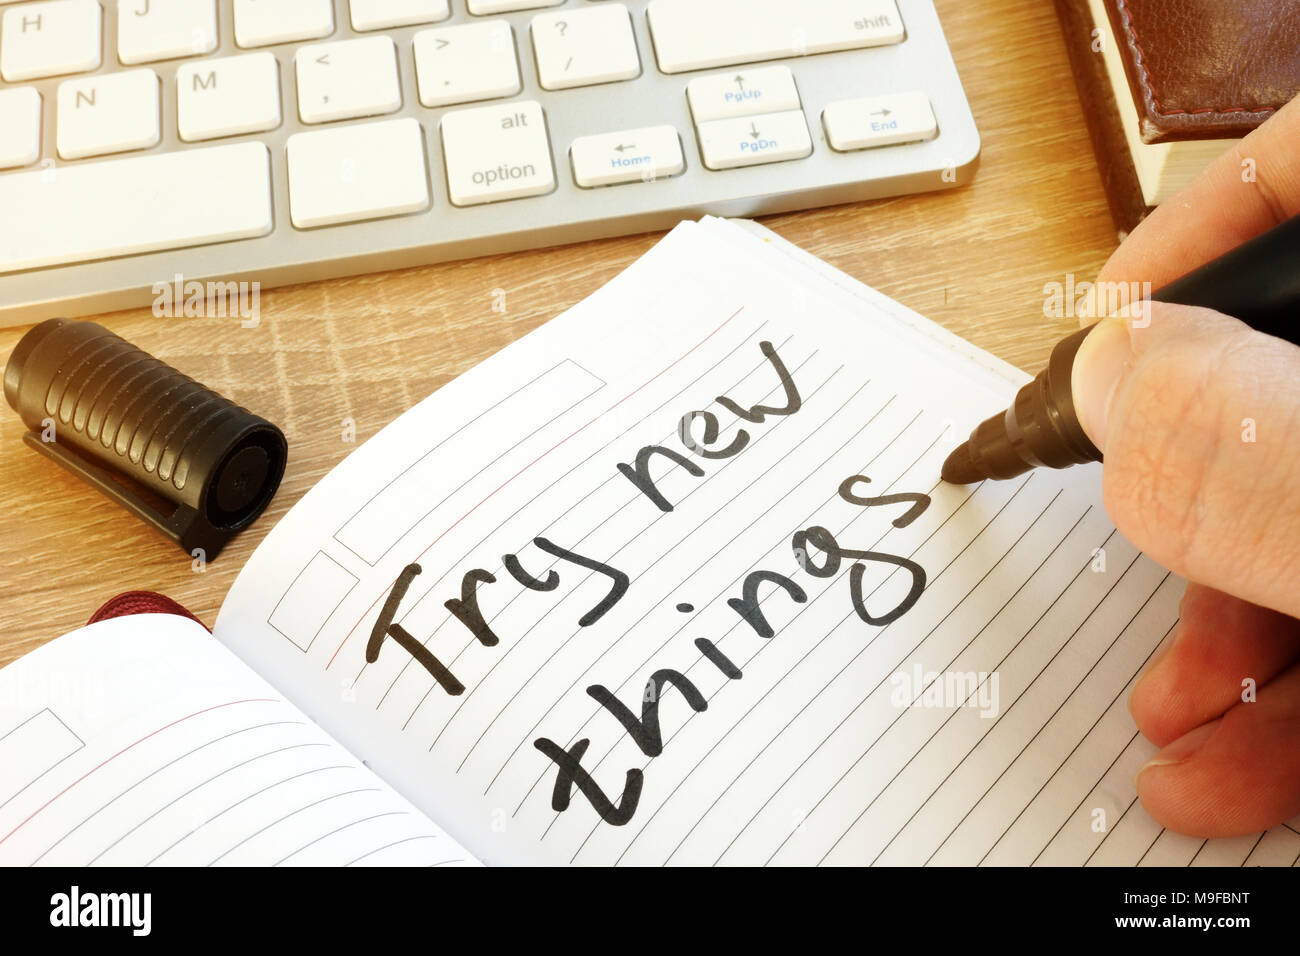 Man writing: try new things in a note. Stock Photo